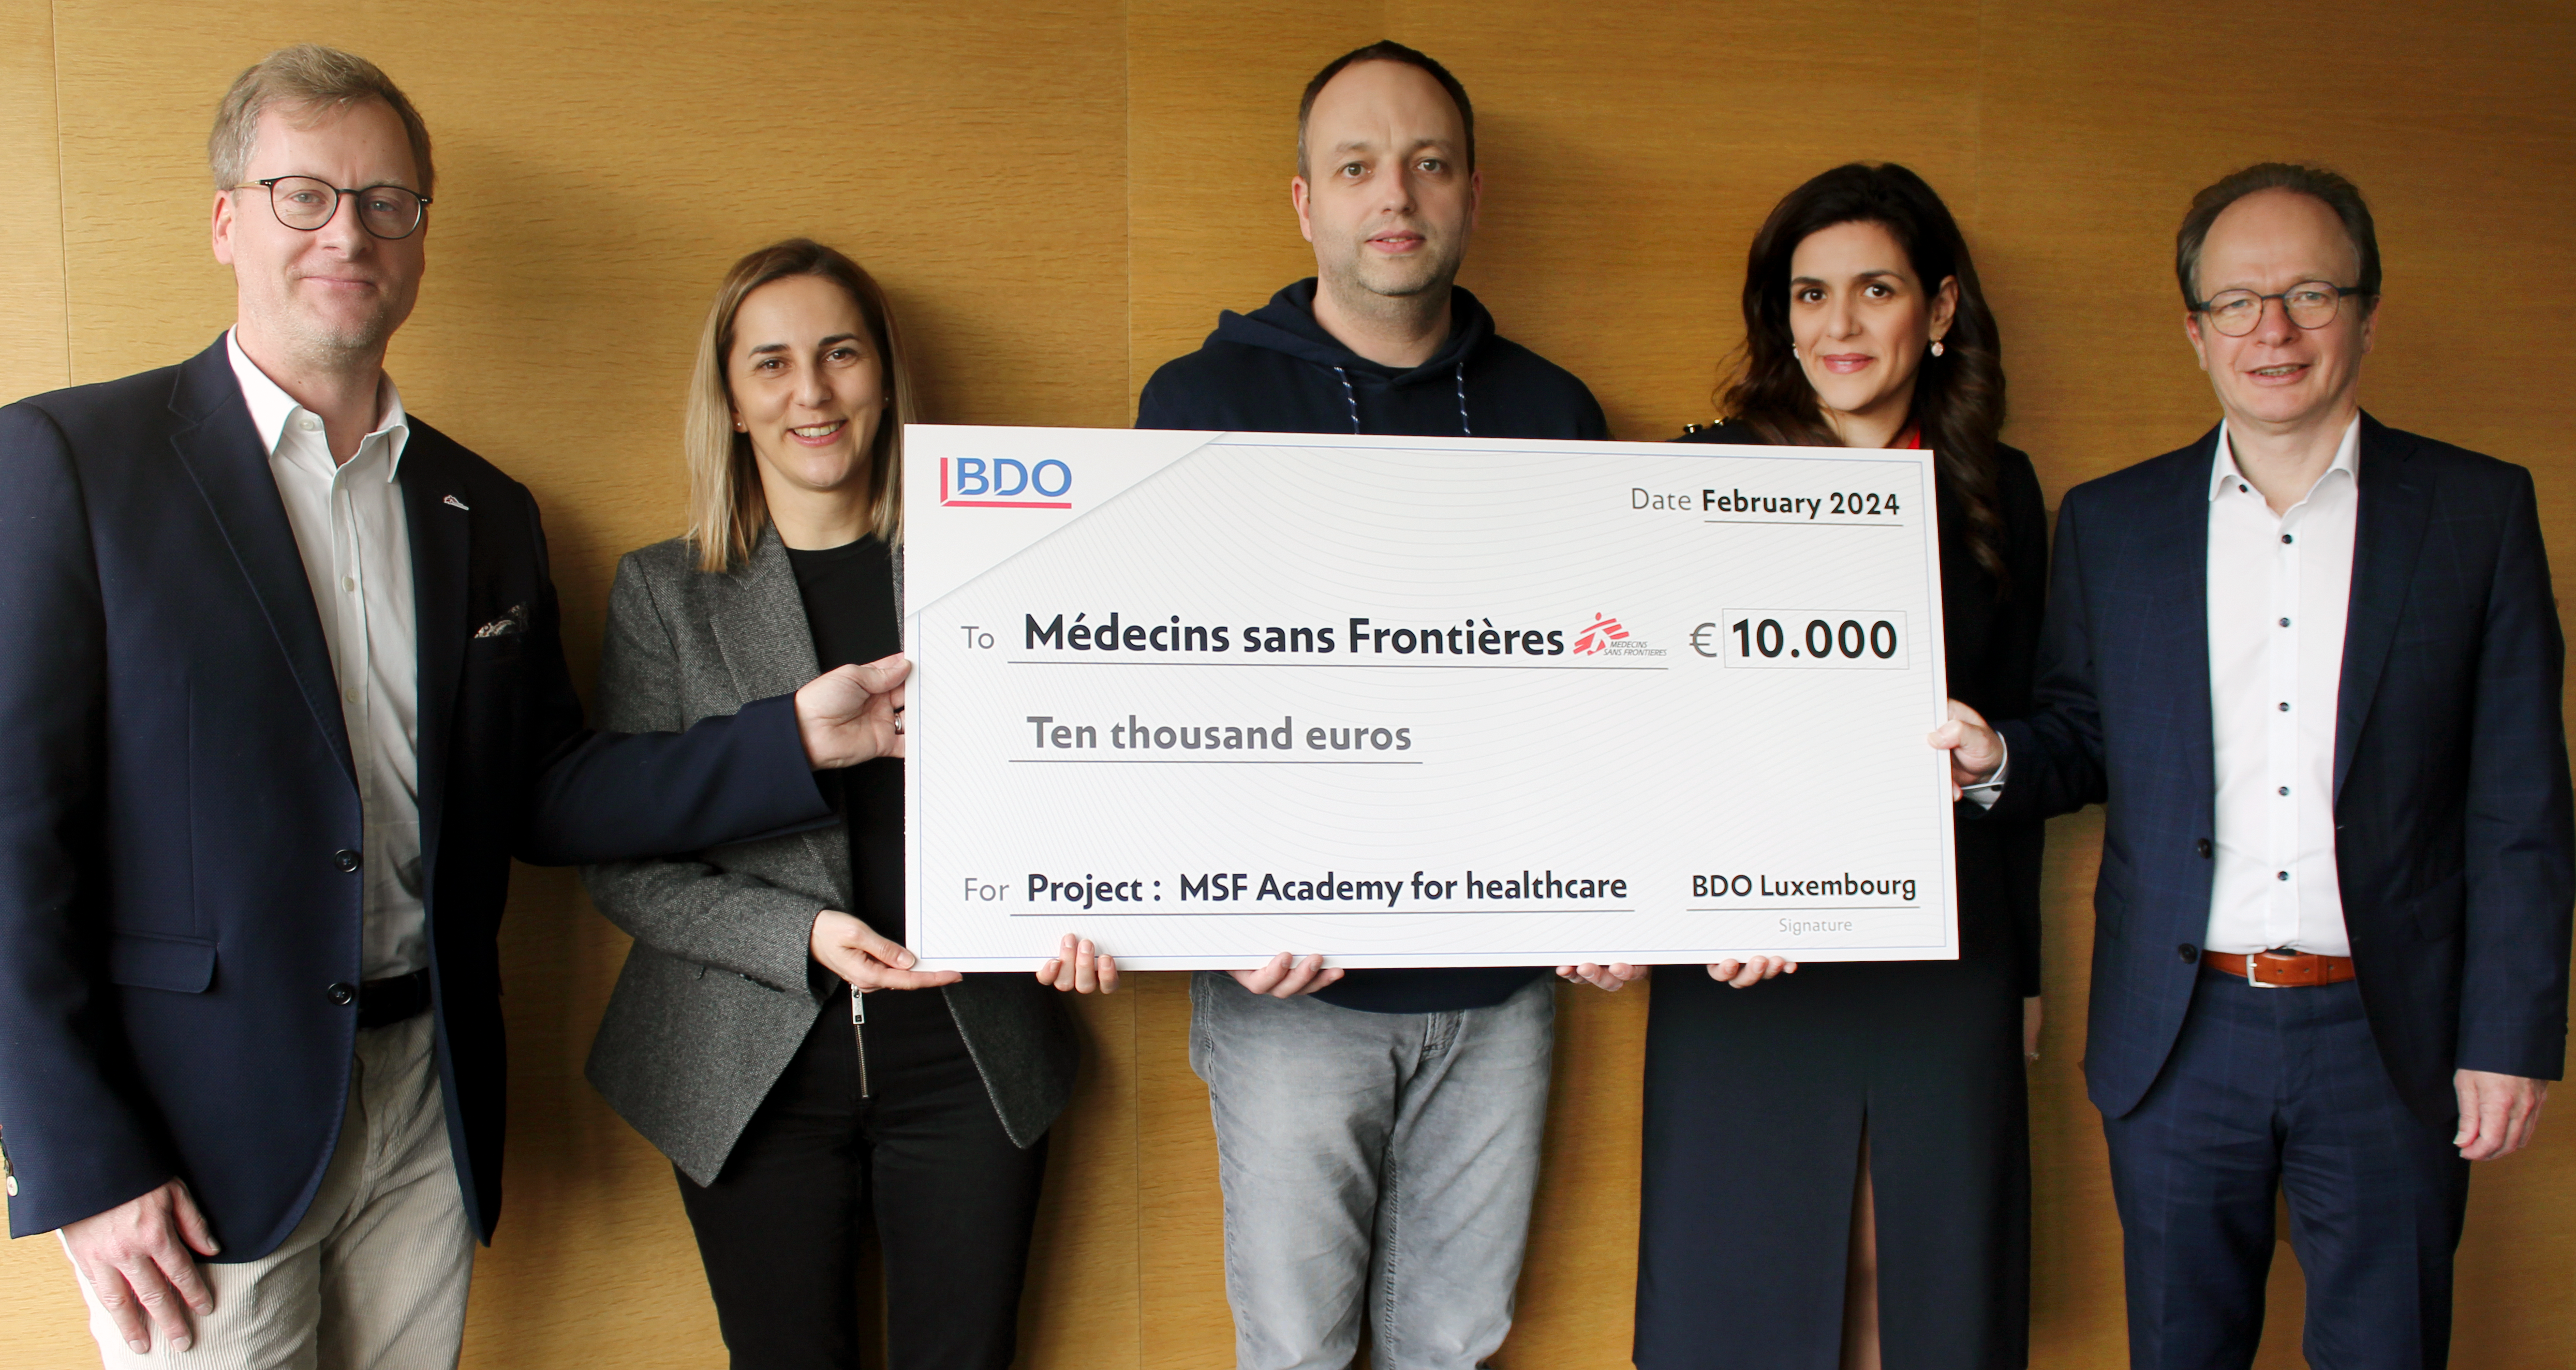 Representatives from BDO Luxembourg handing over the donation